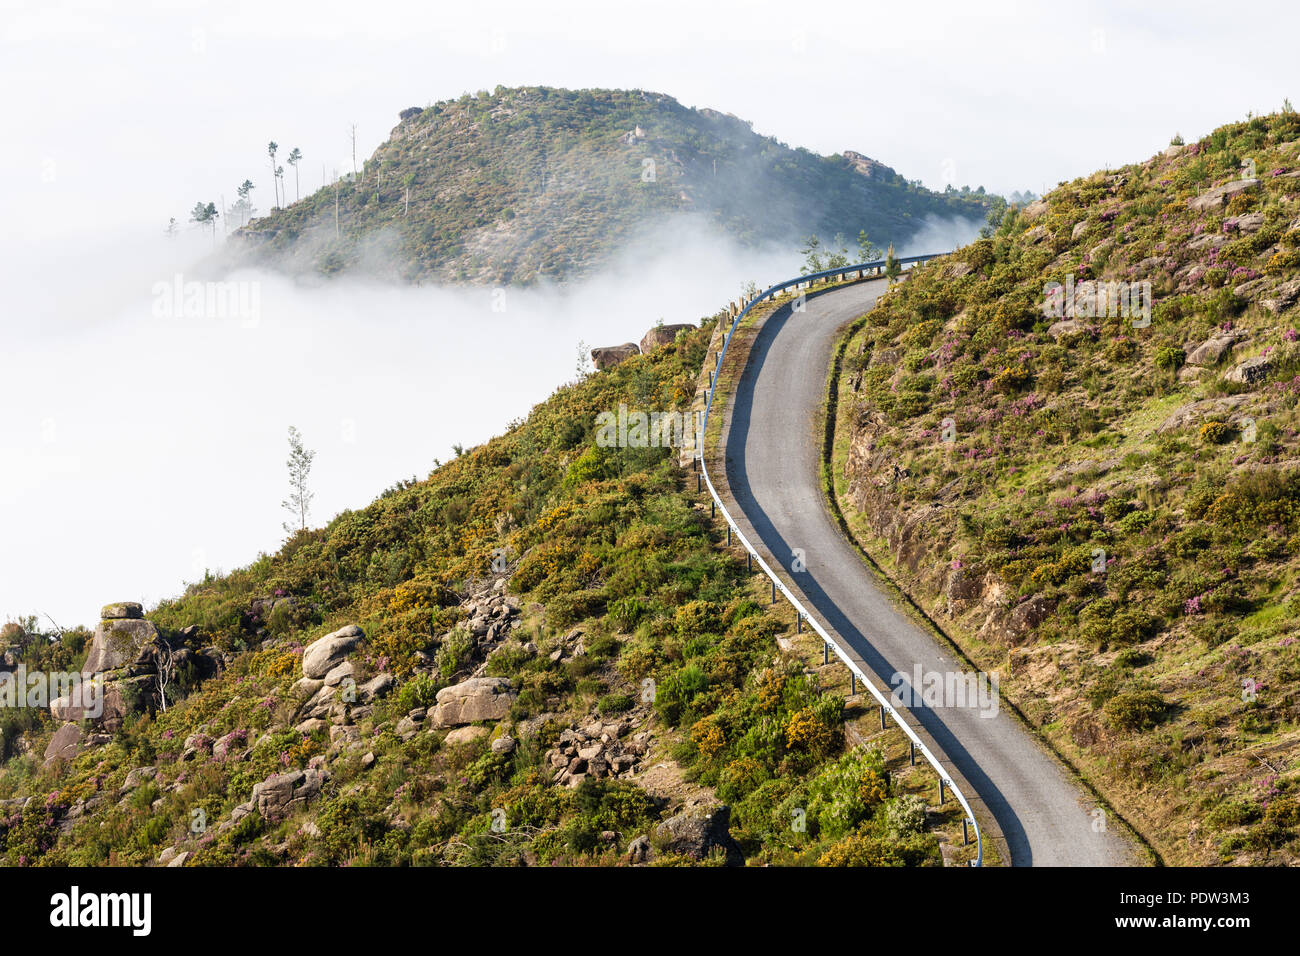 Curving Mountain Road In Mist, Peneda-Geres National Park, Portugal Stock Photo